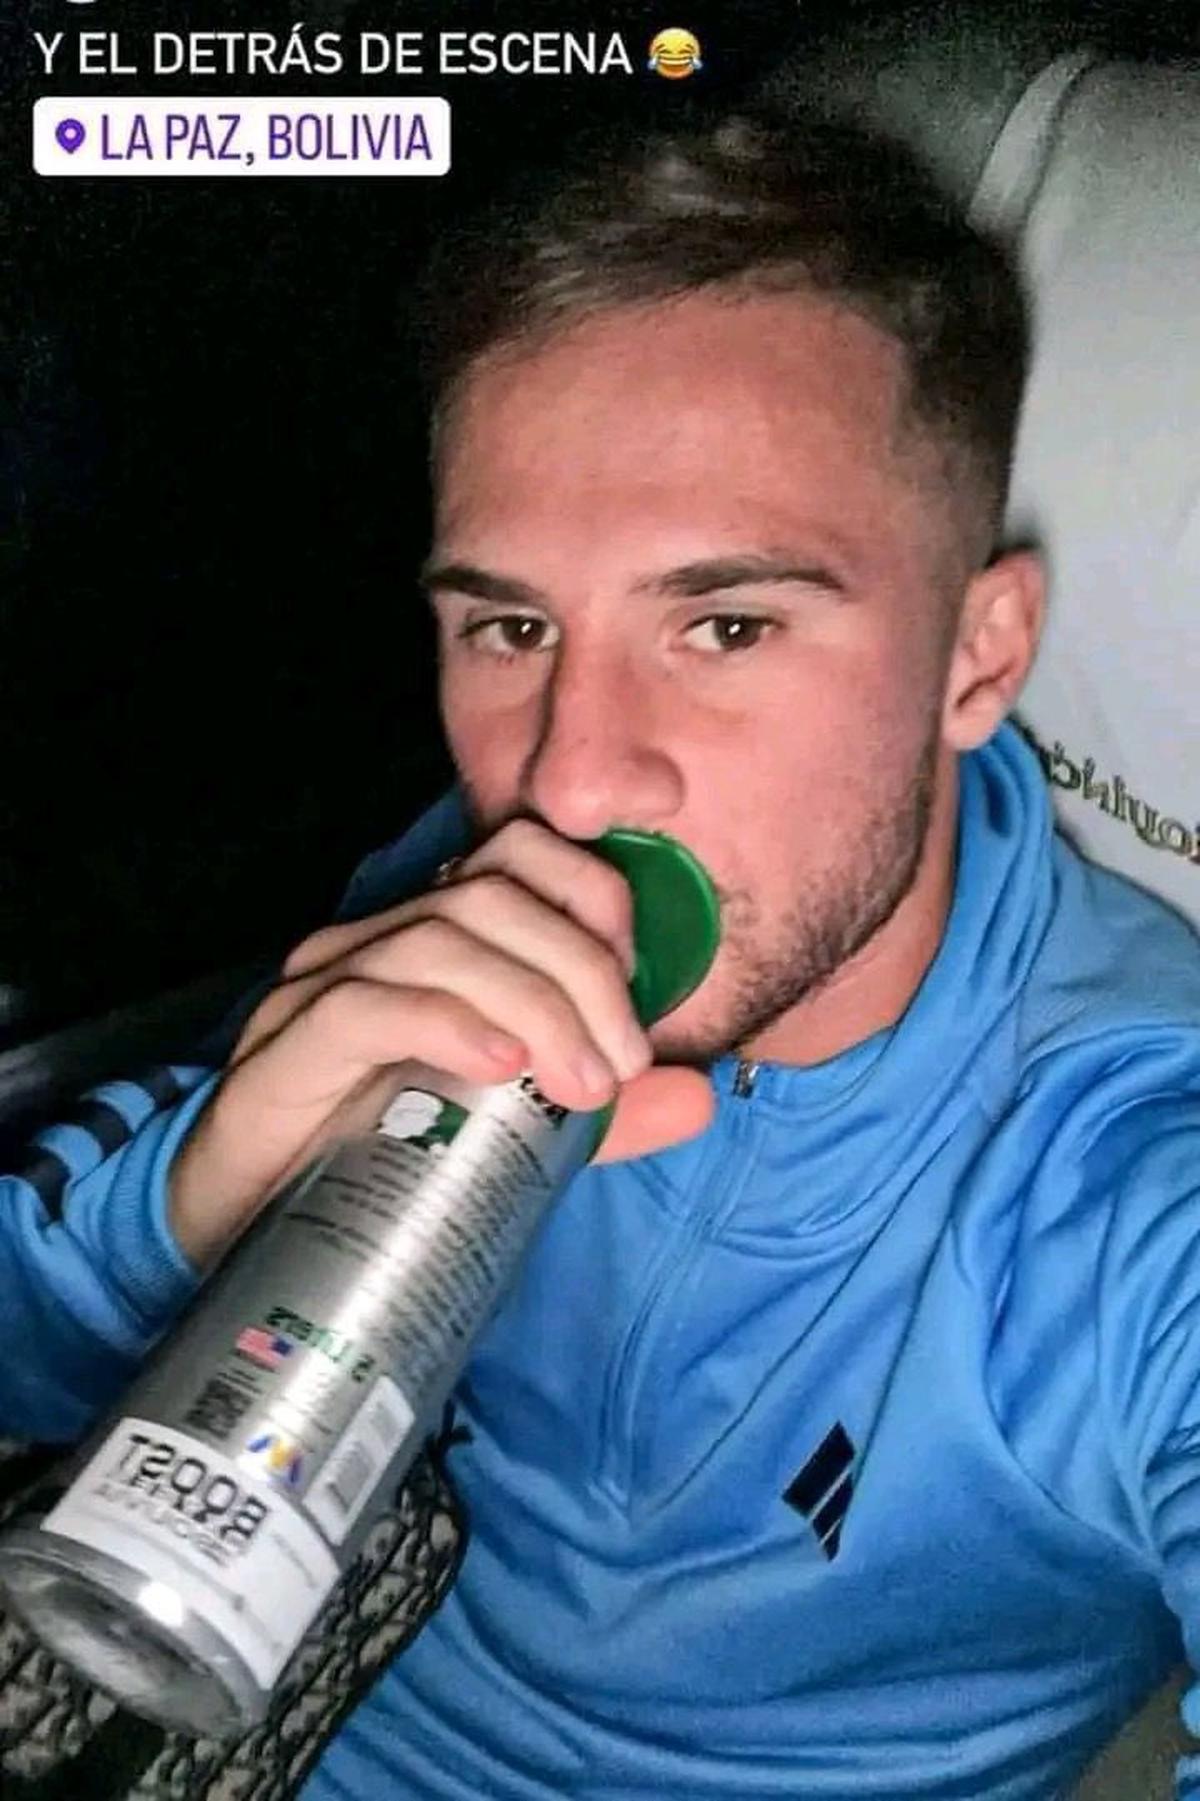 Argentine midfielder using an oxygen tube after arriving at La Paz, Bolivia. 